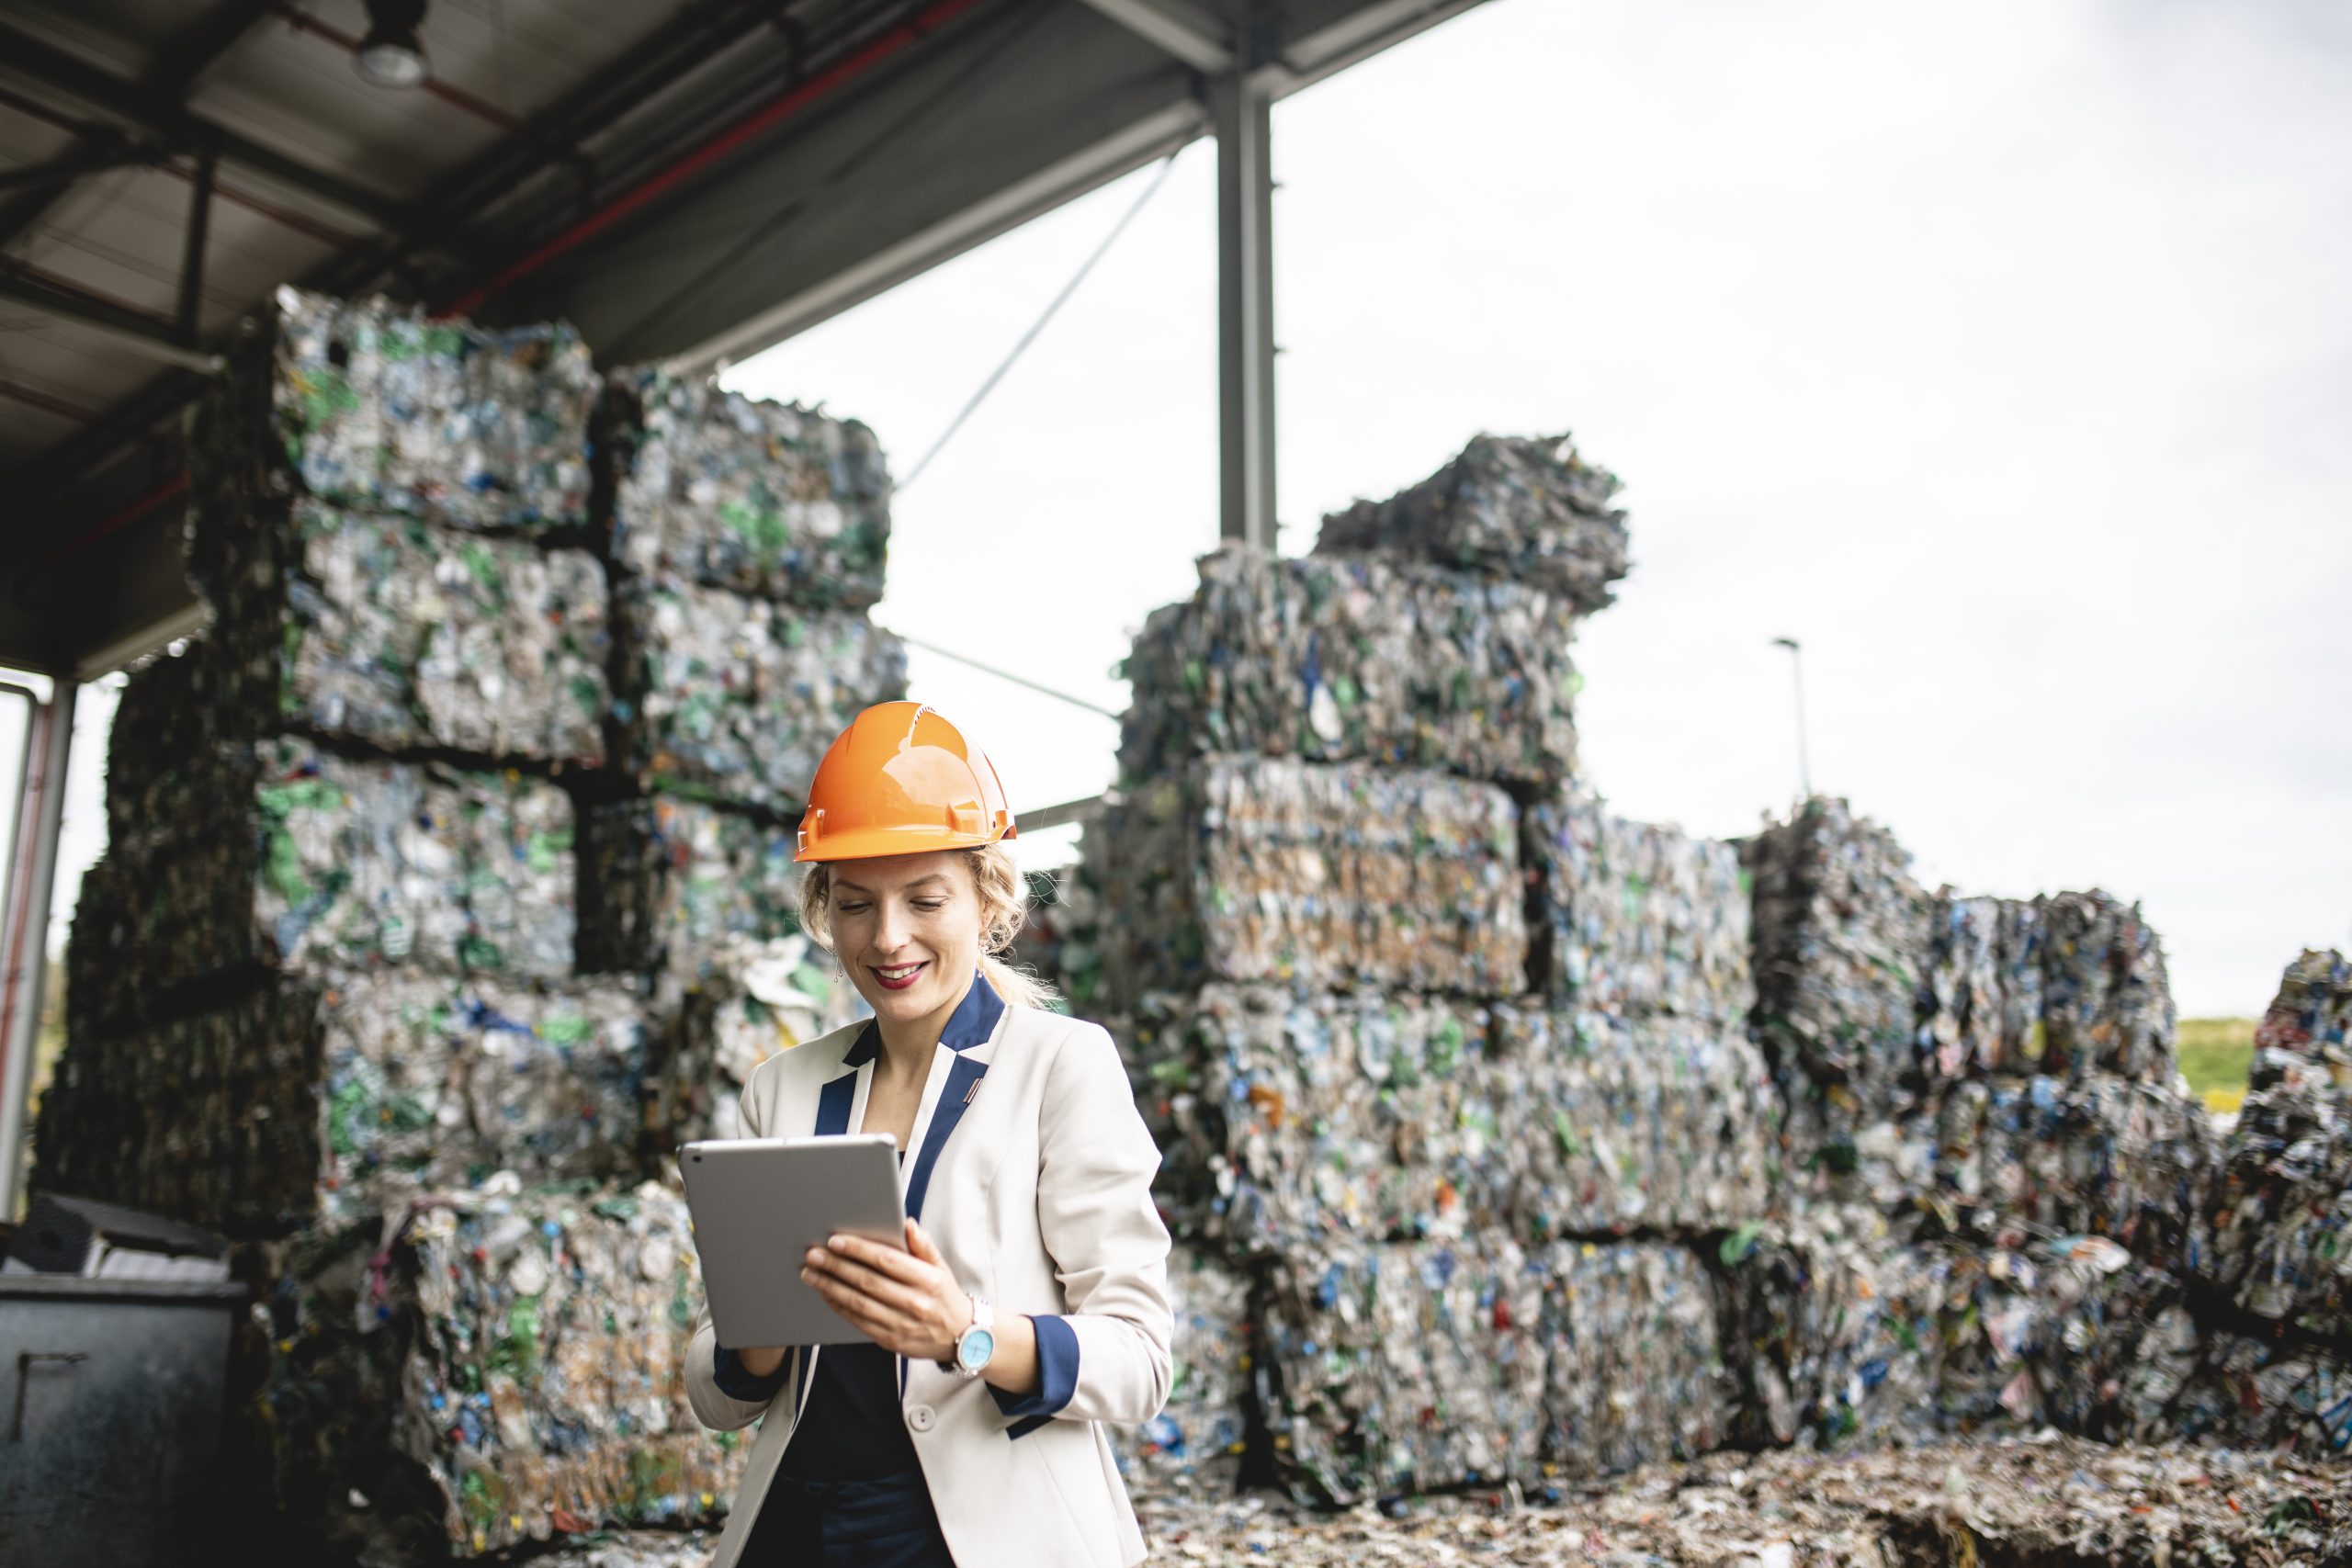 Tracking waste in the cloud: Aussie startup’s innovative data platform helps organisations reduce their carbon footprint and save on costs